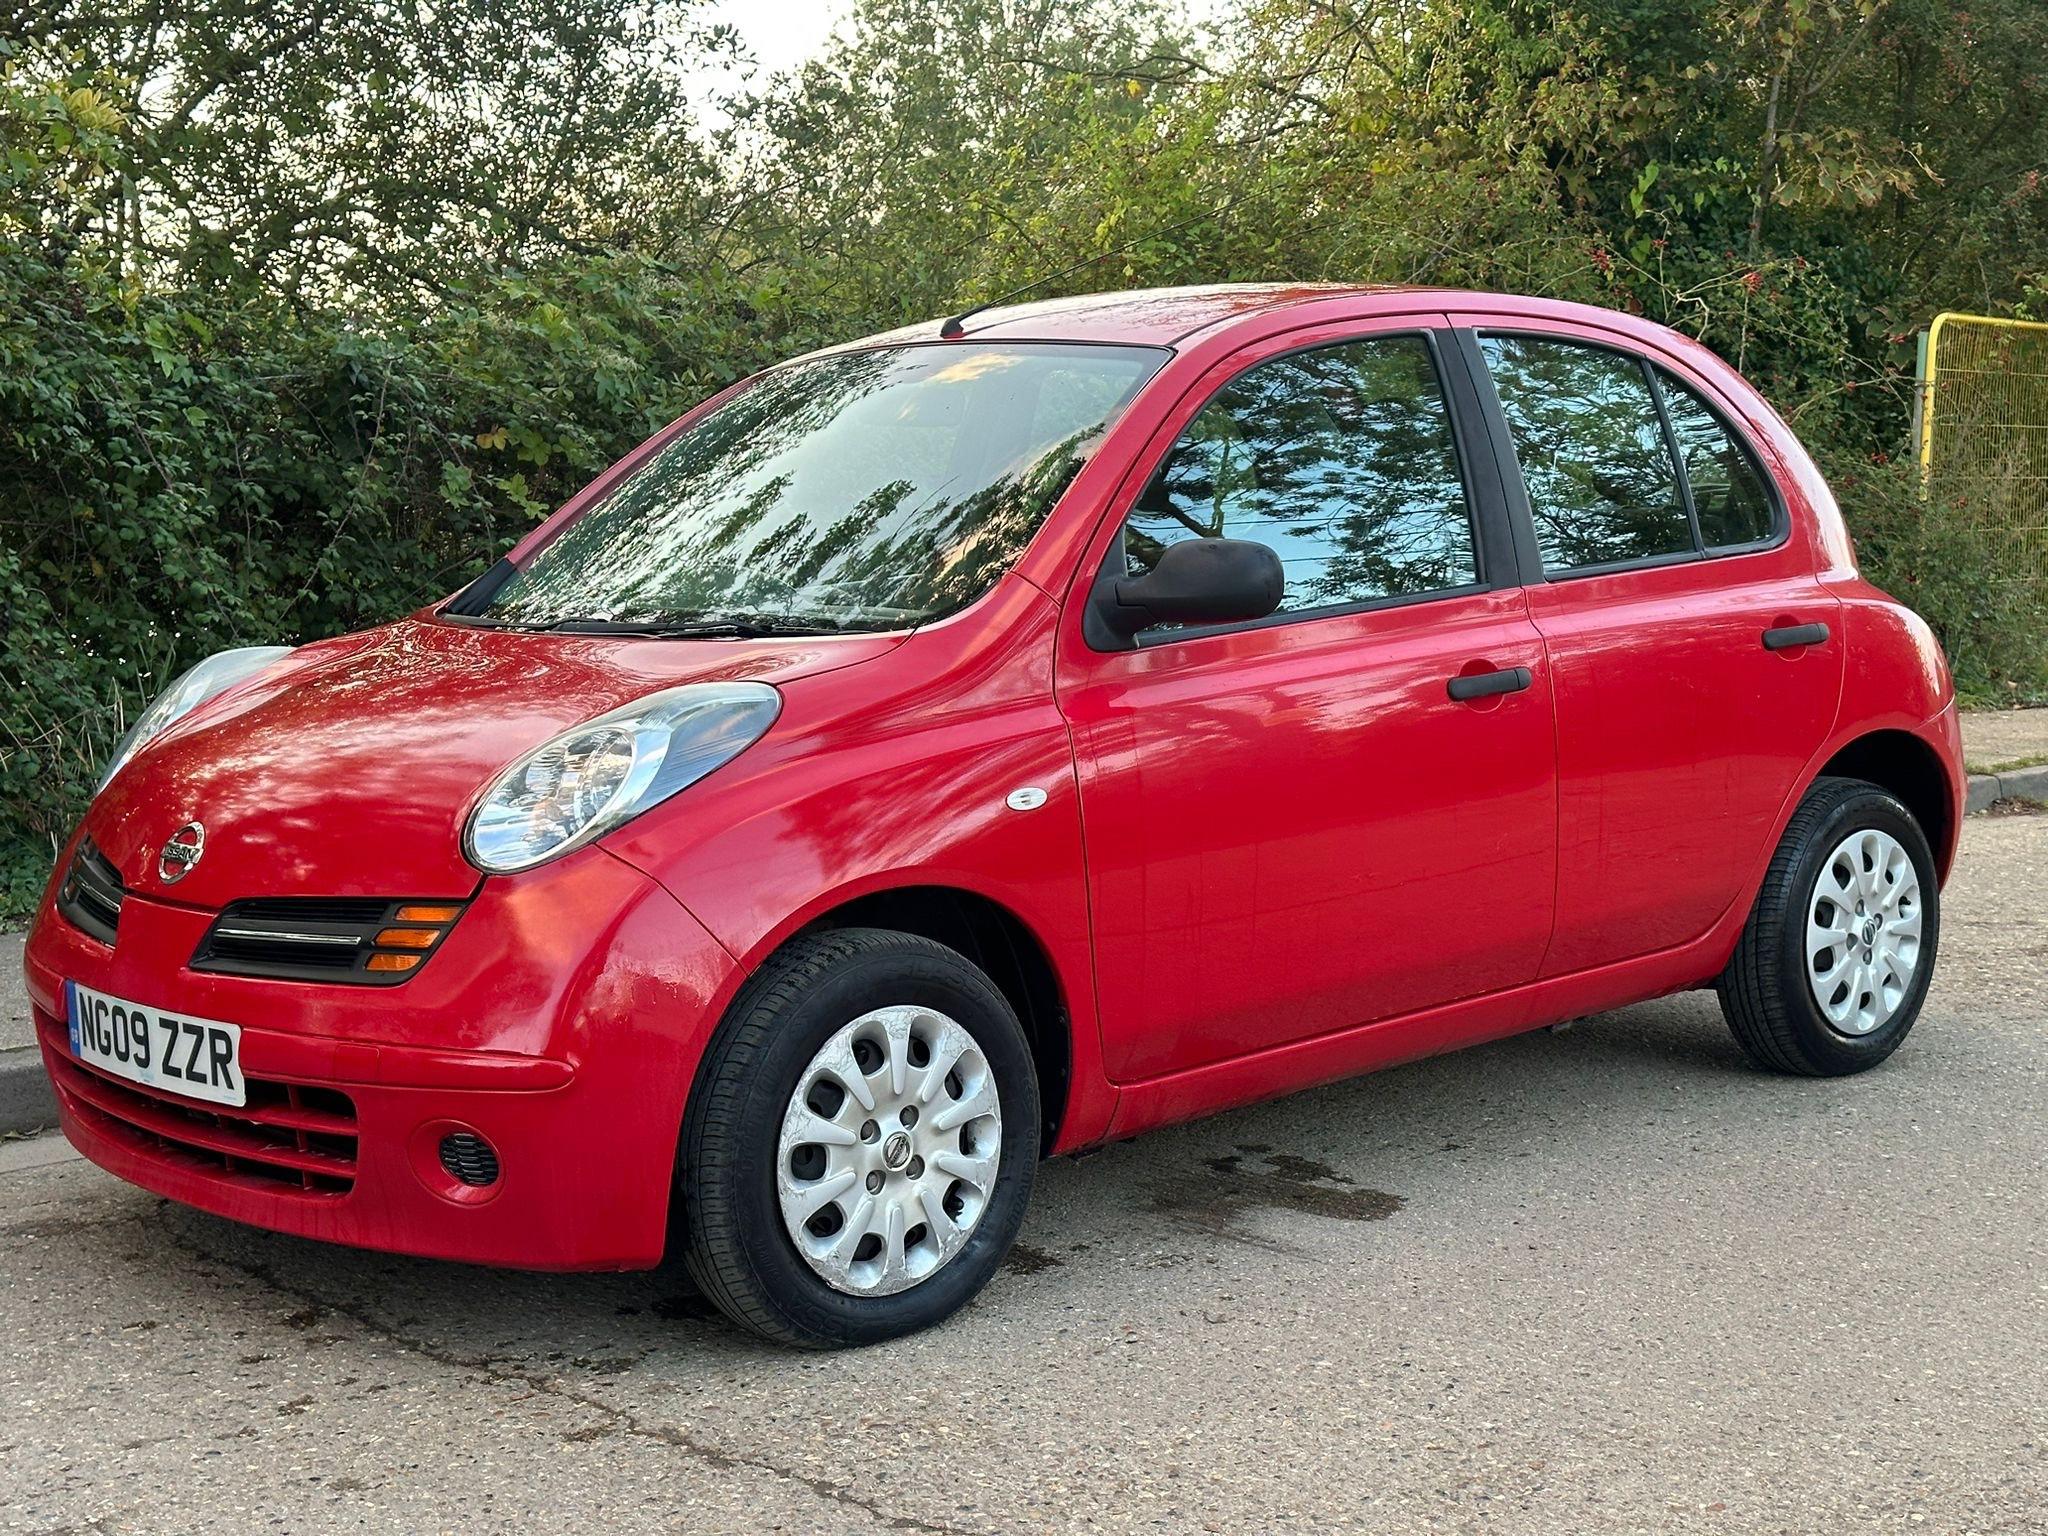 Used Nissan Micra Review - 2003-2010